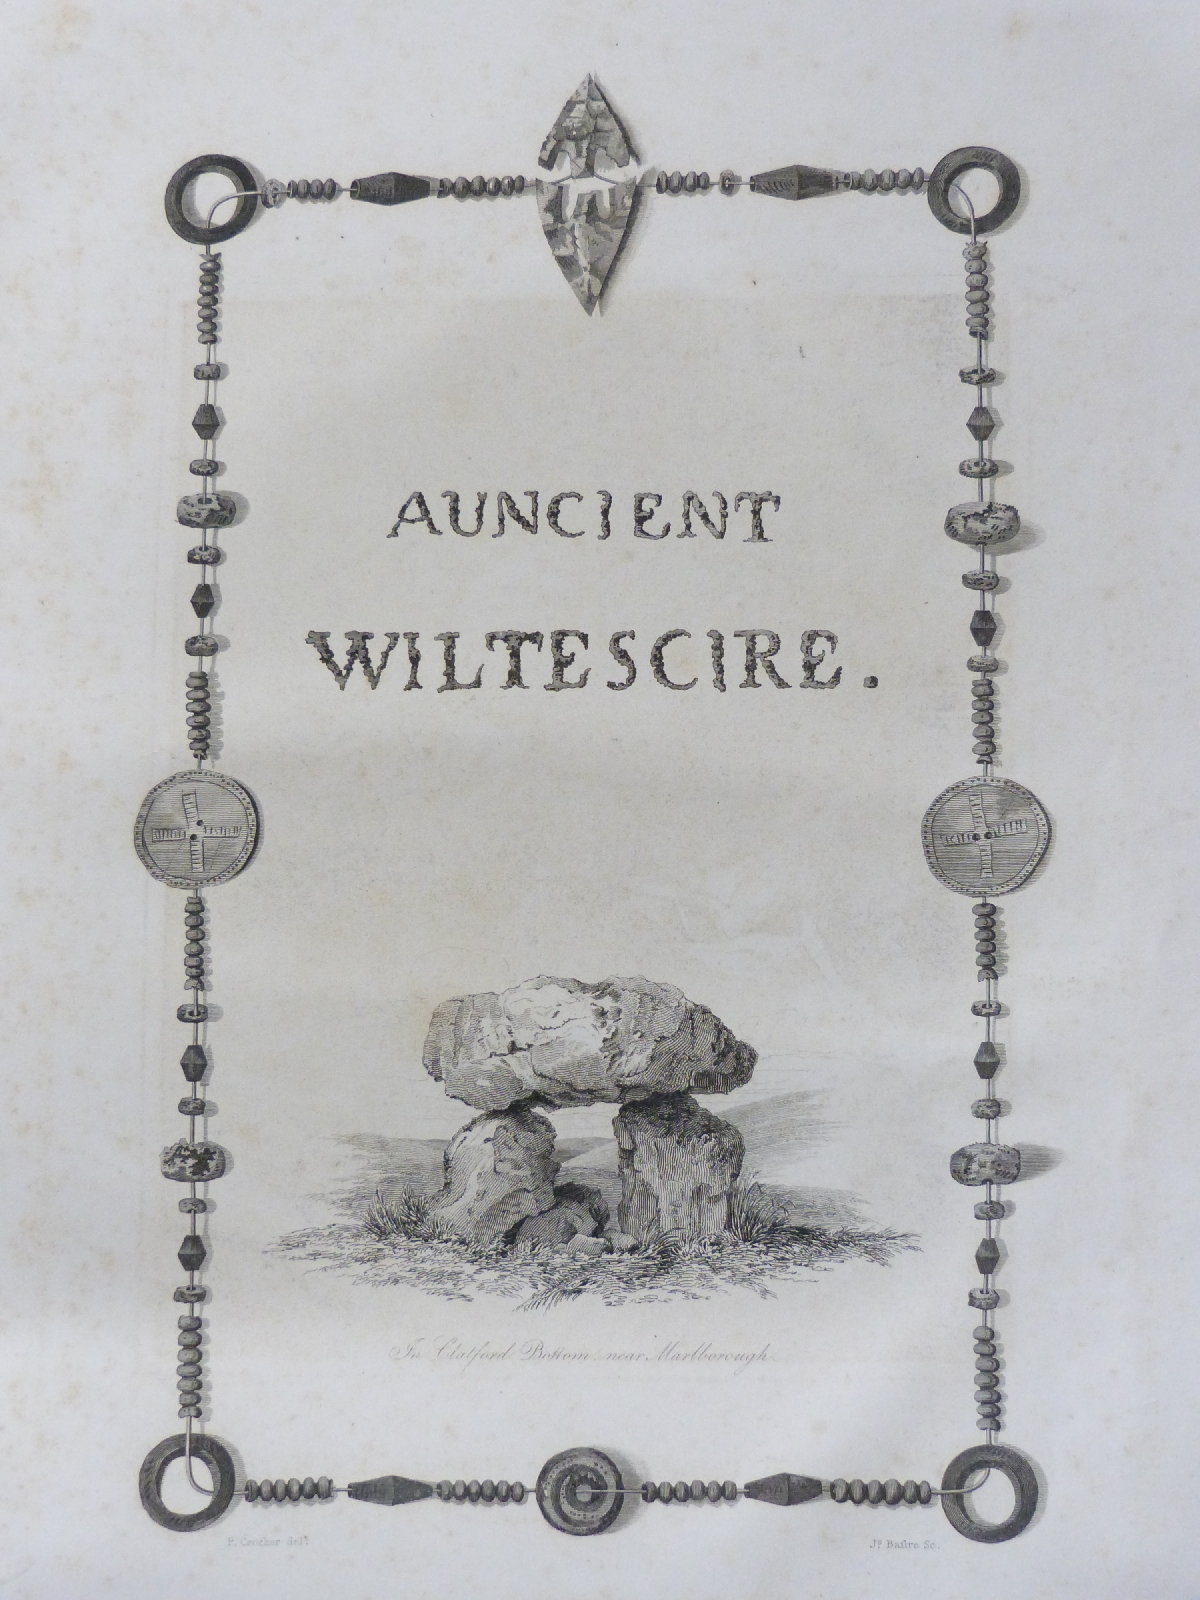 The Ancient History of South Wiltshire by Sir Richard Colt Hoare, Bart published William Miller 1812 - Image 4 of 5